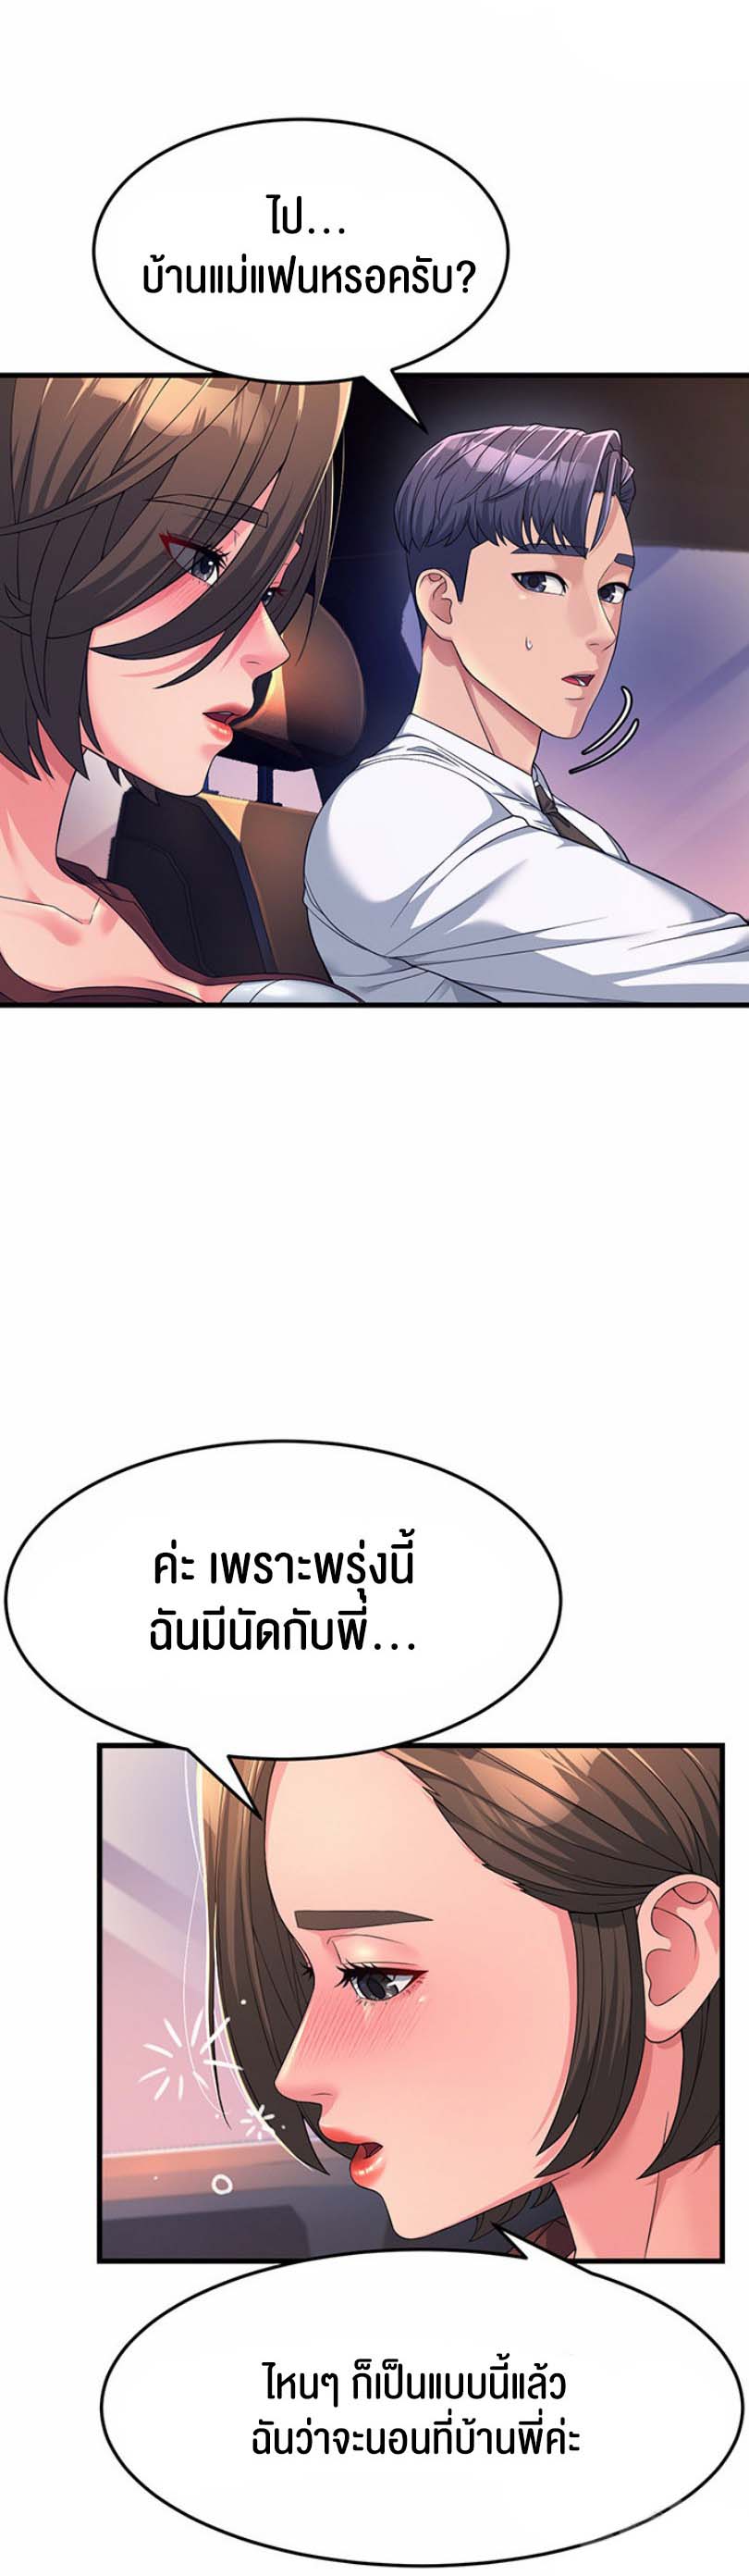 à¸­à¹ˆà¸²à¸™à¹‚à¸”à¸ˆà¸´à¸™ à¹€à¸£à¸·à¹ˆà¸­à¸‡ Mother in Law Bends To My Will 9 25